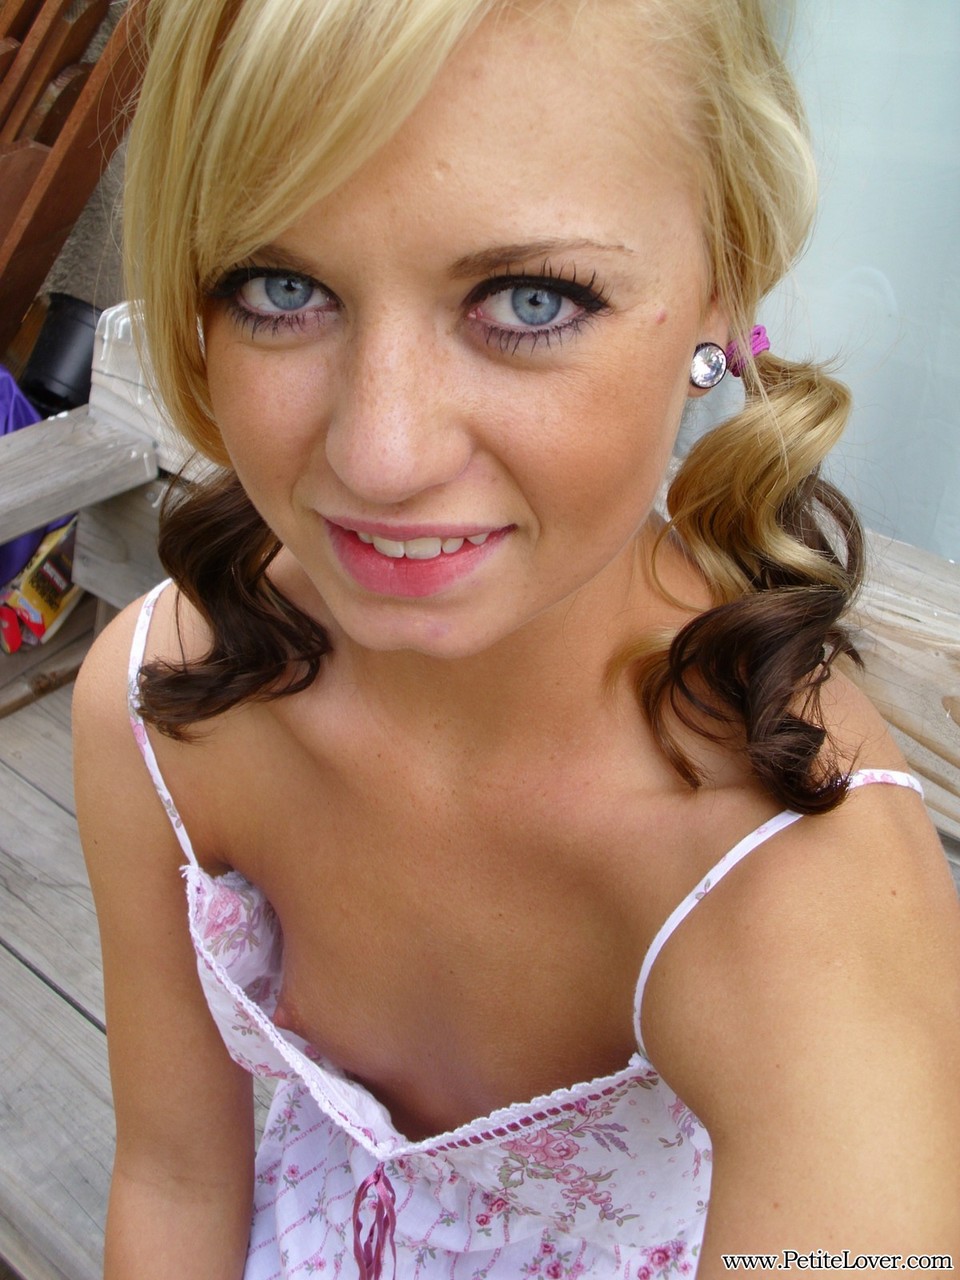 Cute blonde Tiff in pigtails showing off her wee small tits & tiny bald pussy foto porno #428478635 | Petite Lover Pics, Tiff, Amateur, porno ponsel